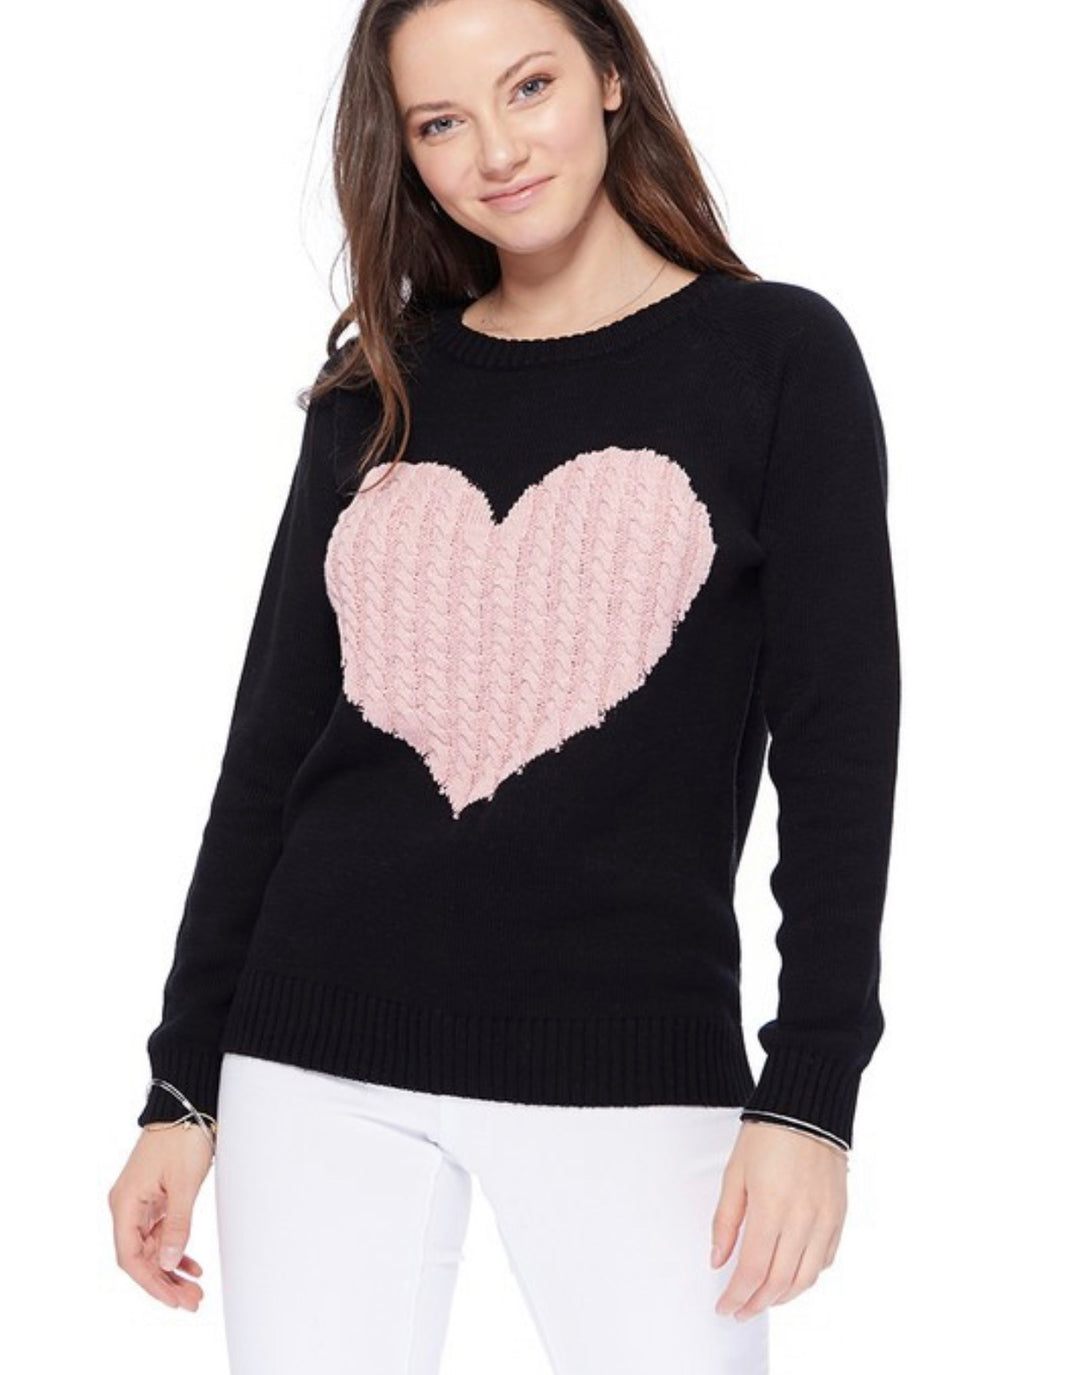 Valentine's Day Heart Sweater - Black and Pink *